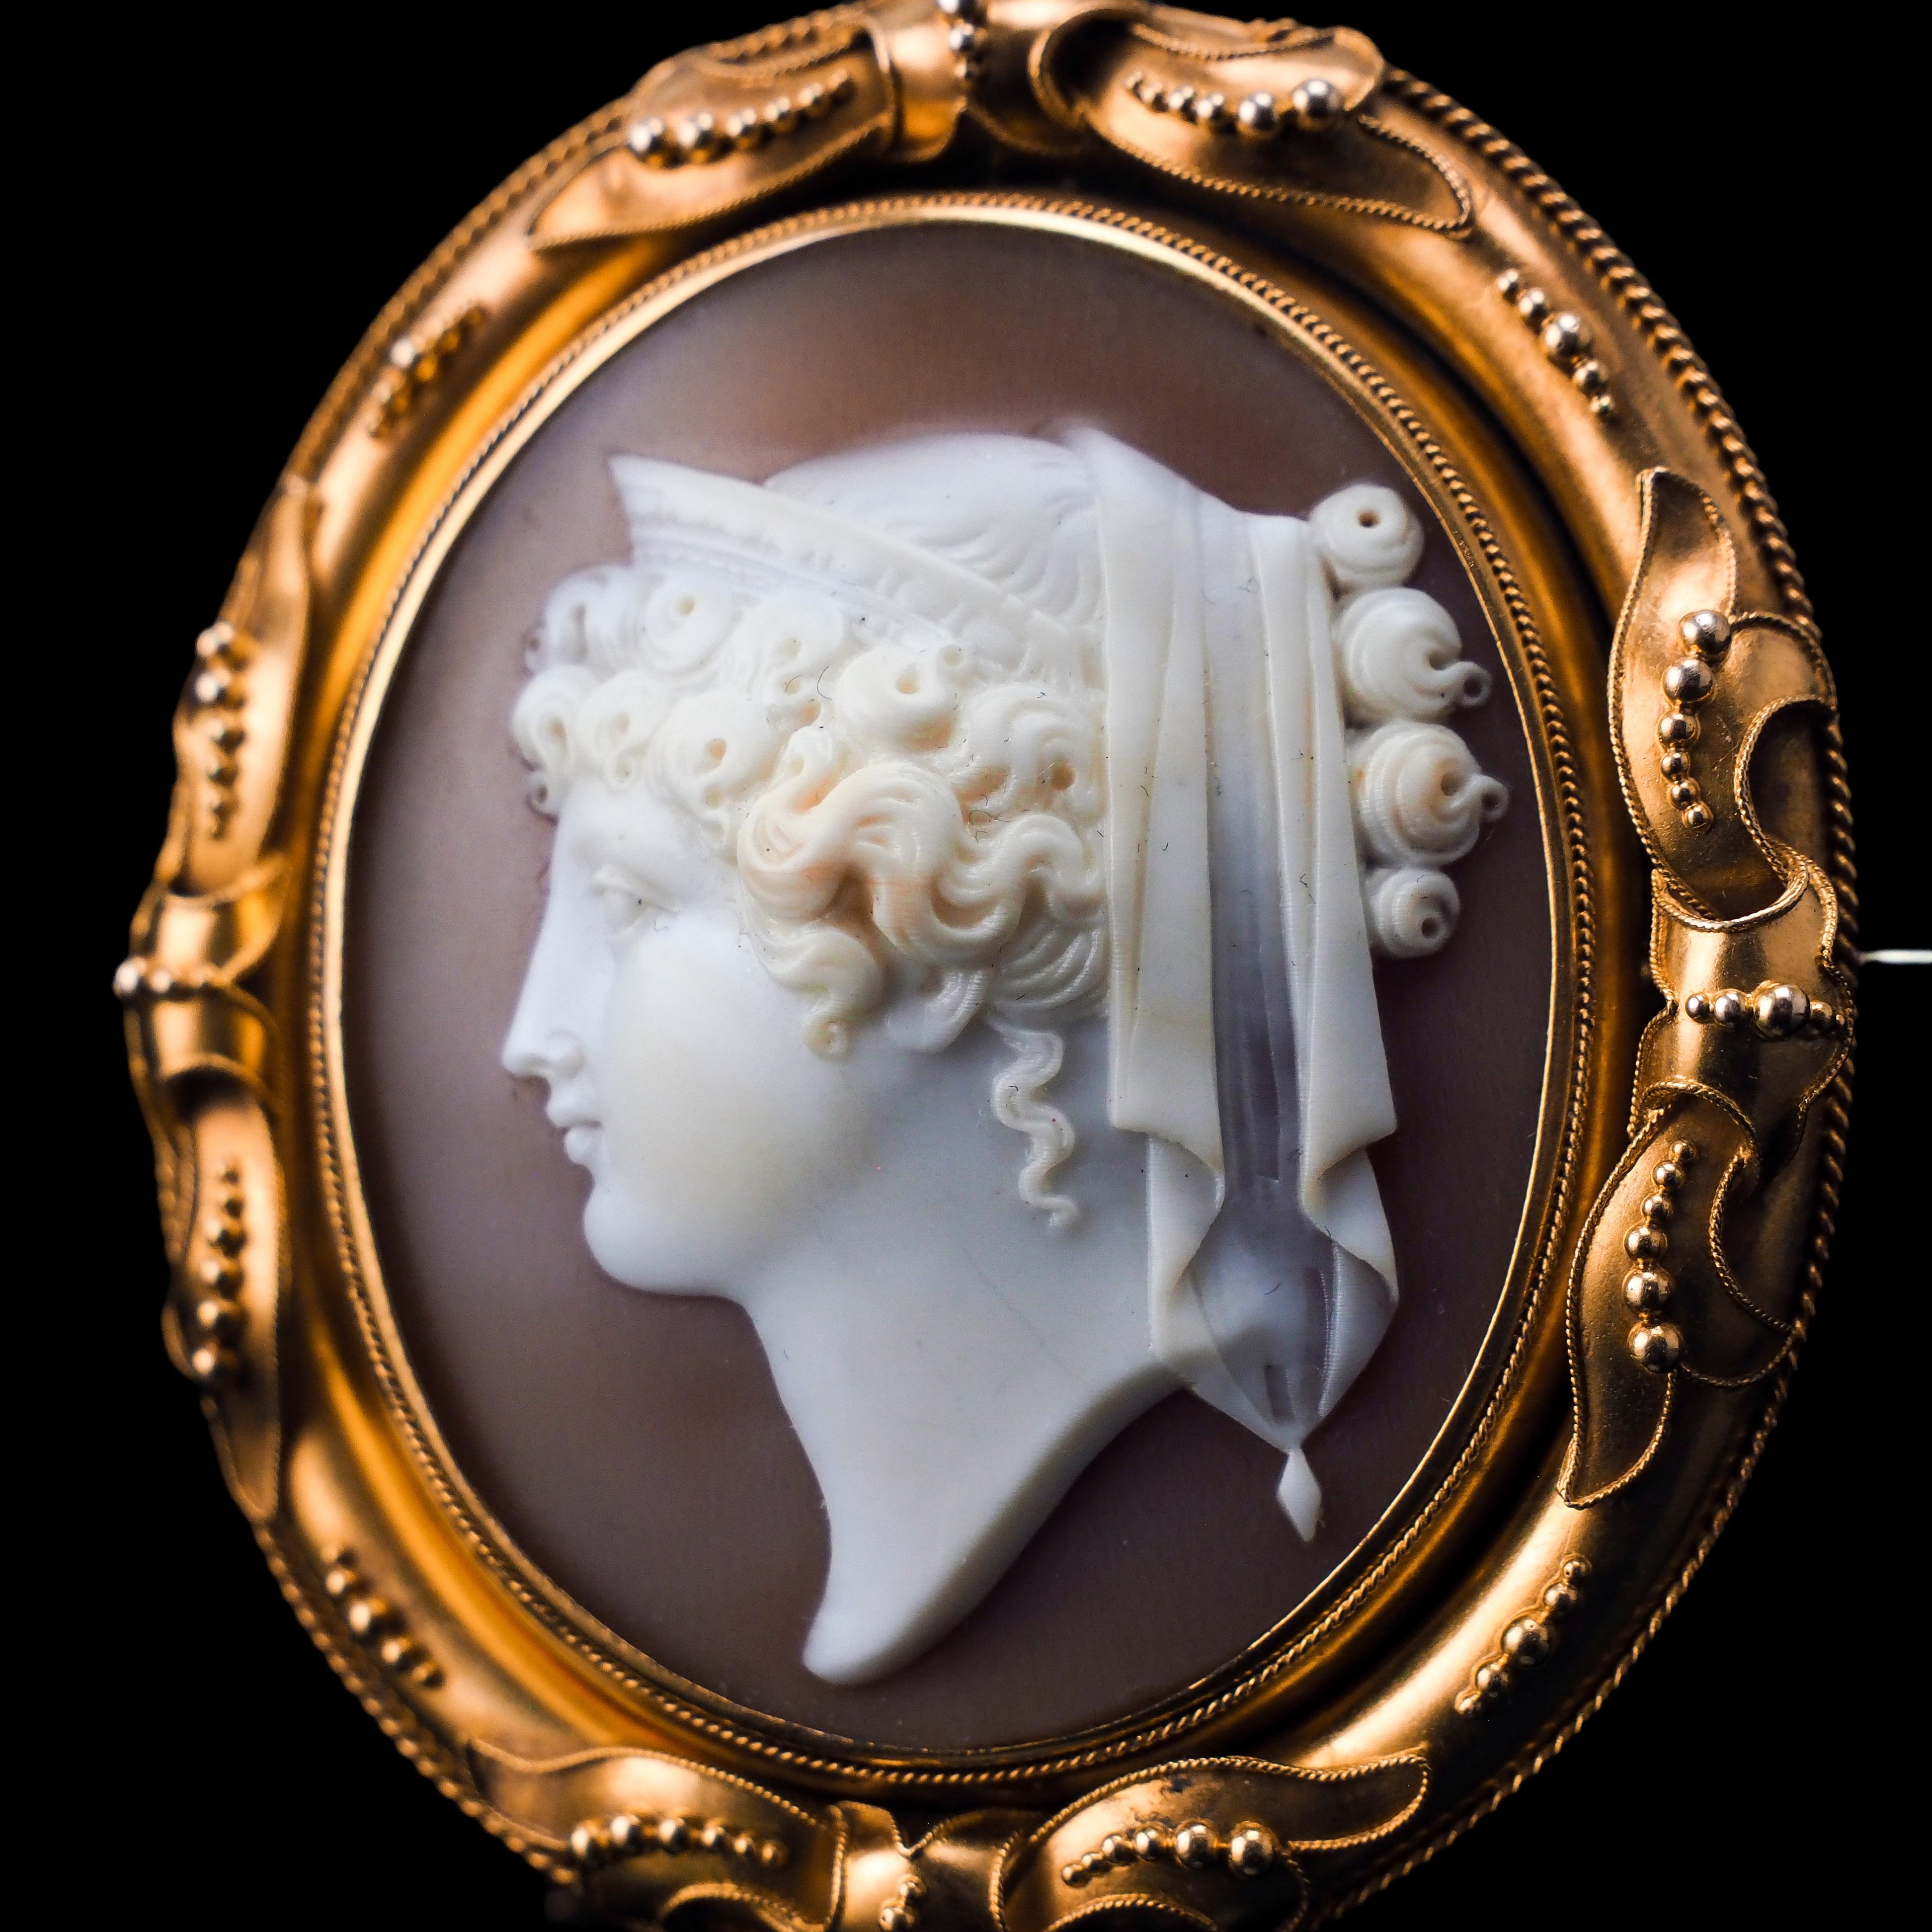 Women's or Men's Antique Cameo Brooch Pendant Necklace 18K Gold - Victorian c.1860 For Sale